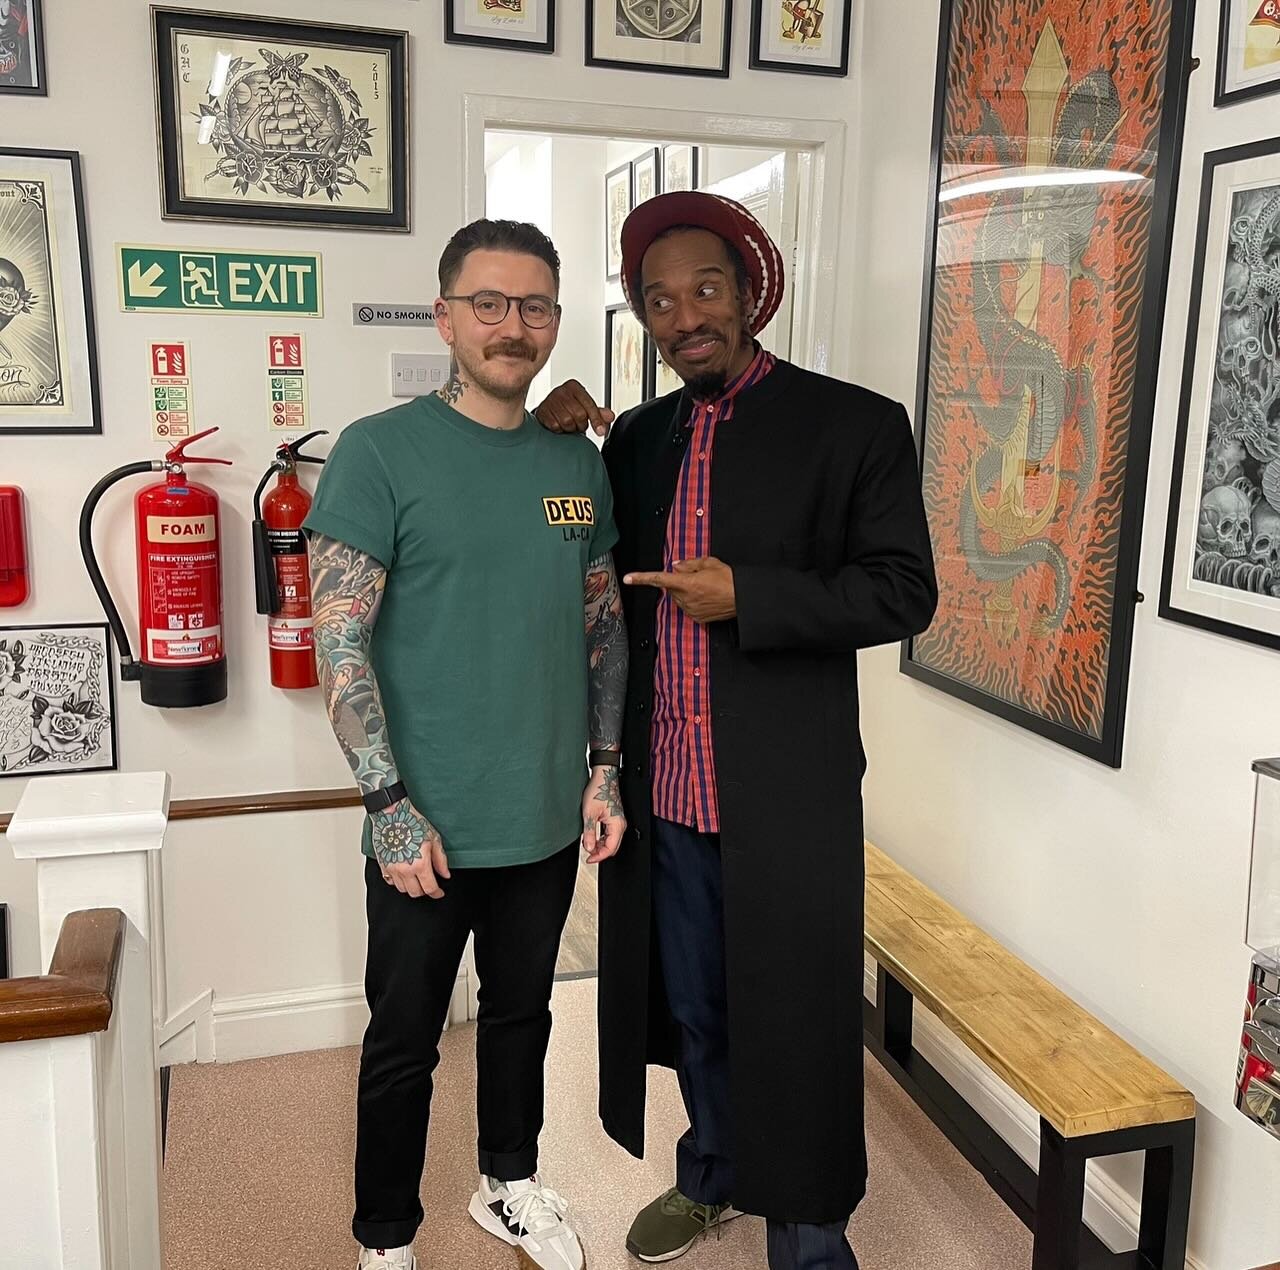 I write this shocked and teary-eyed&hellip; but here we go. I first encountered Benjamin in March. Following my appearance on the BBC, he reached out to me after seeing my segment in the Manchester studio. 

After connecting, he paid a visit for a ca